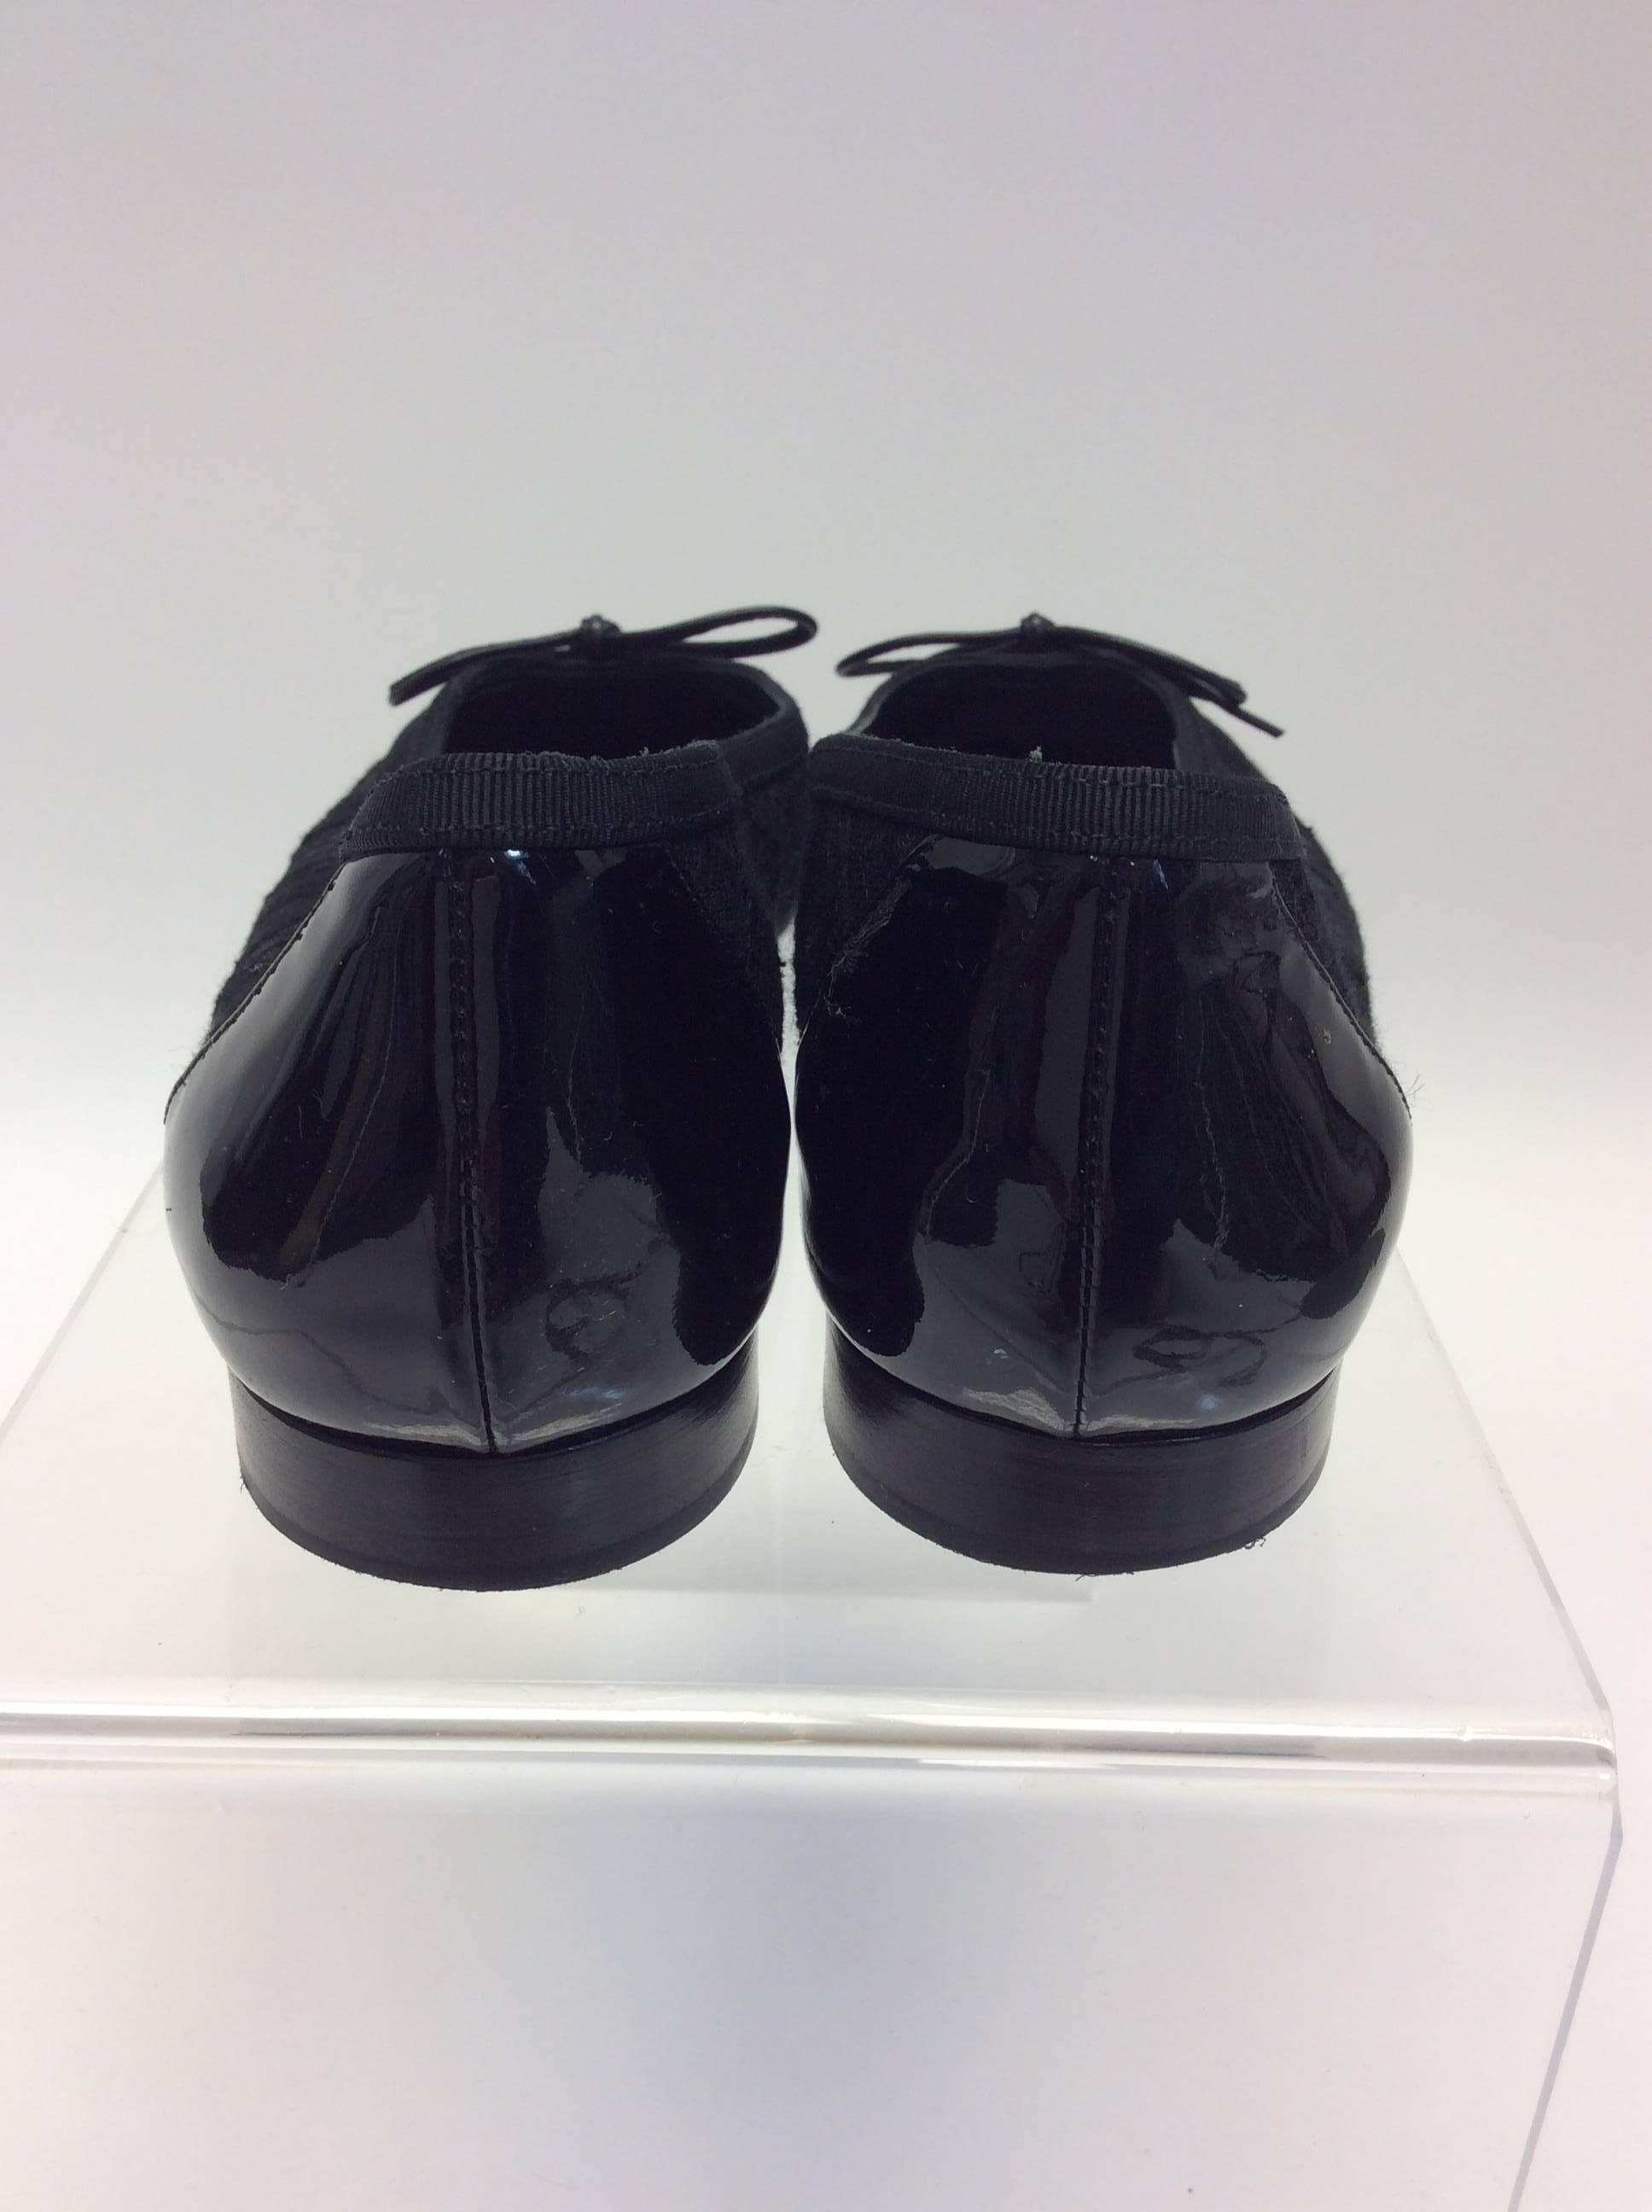 Chanel Black Lace Flats In Excellent Condition For Sale In Narberth, PA